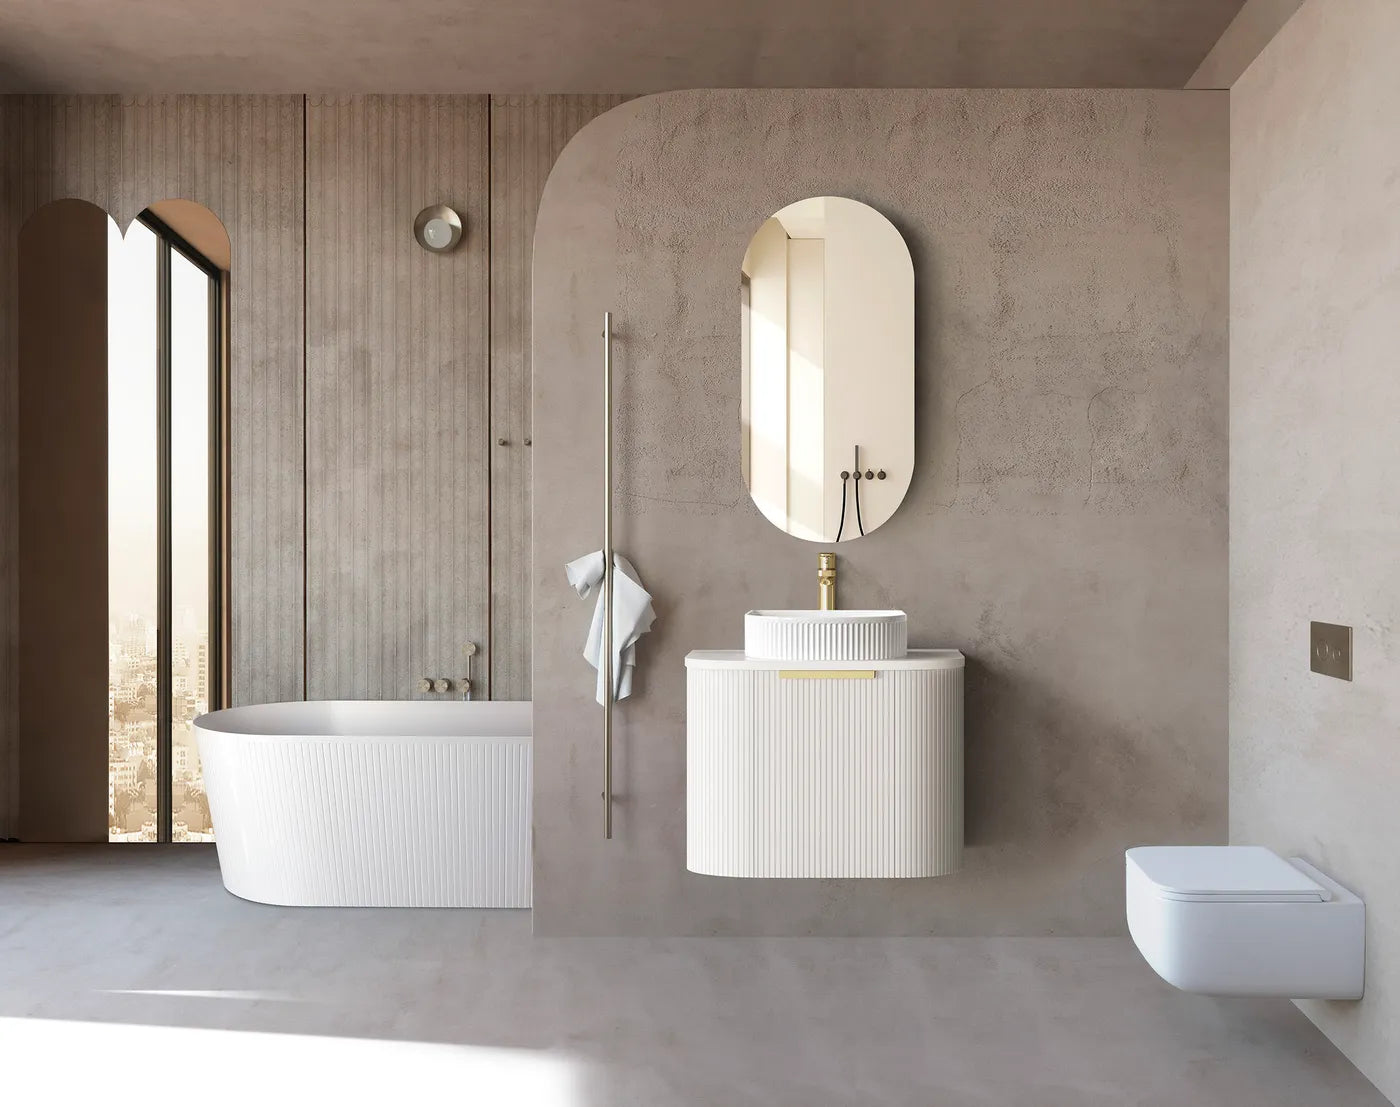 Small Bathroom, Big Style: Maximising Space in Your Cozy Oasis